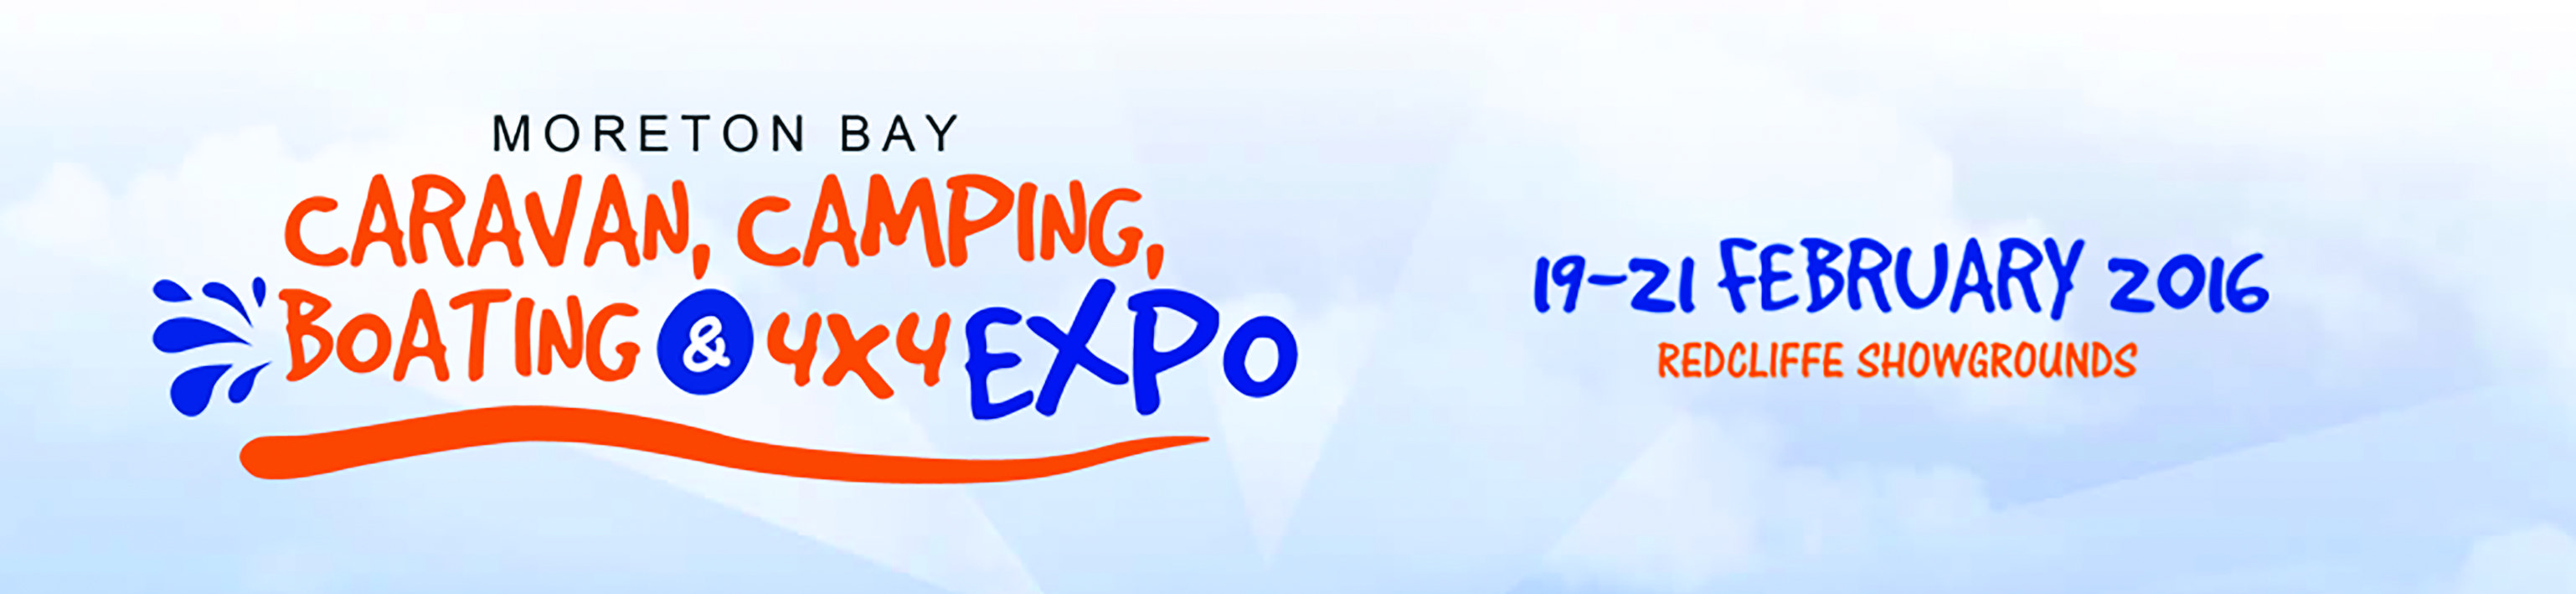 expo banner